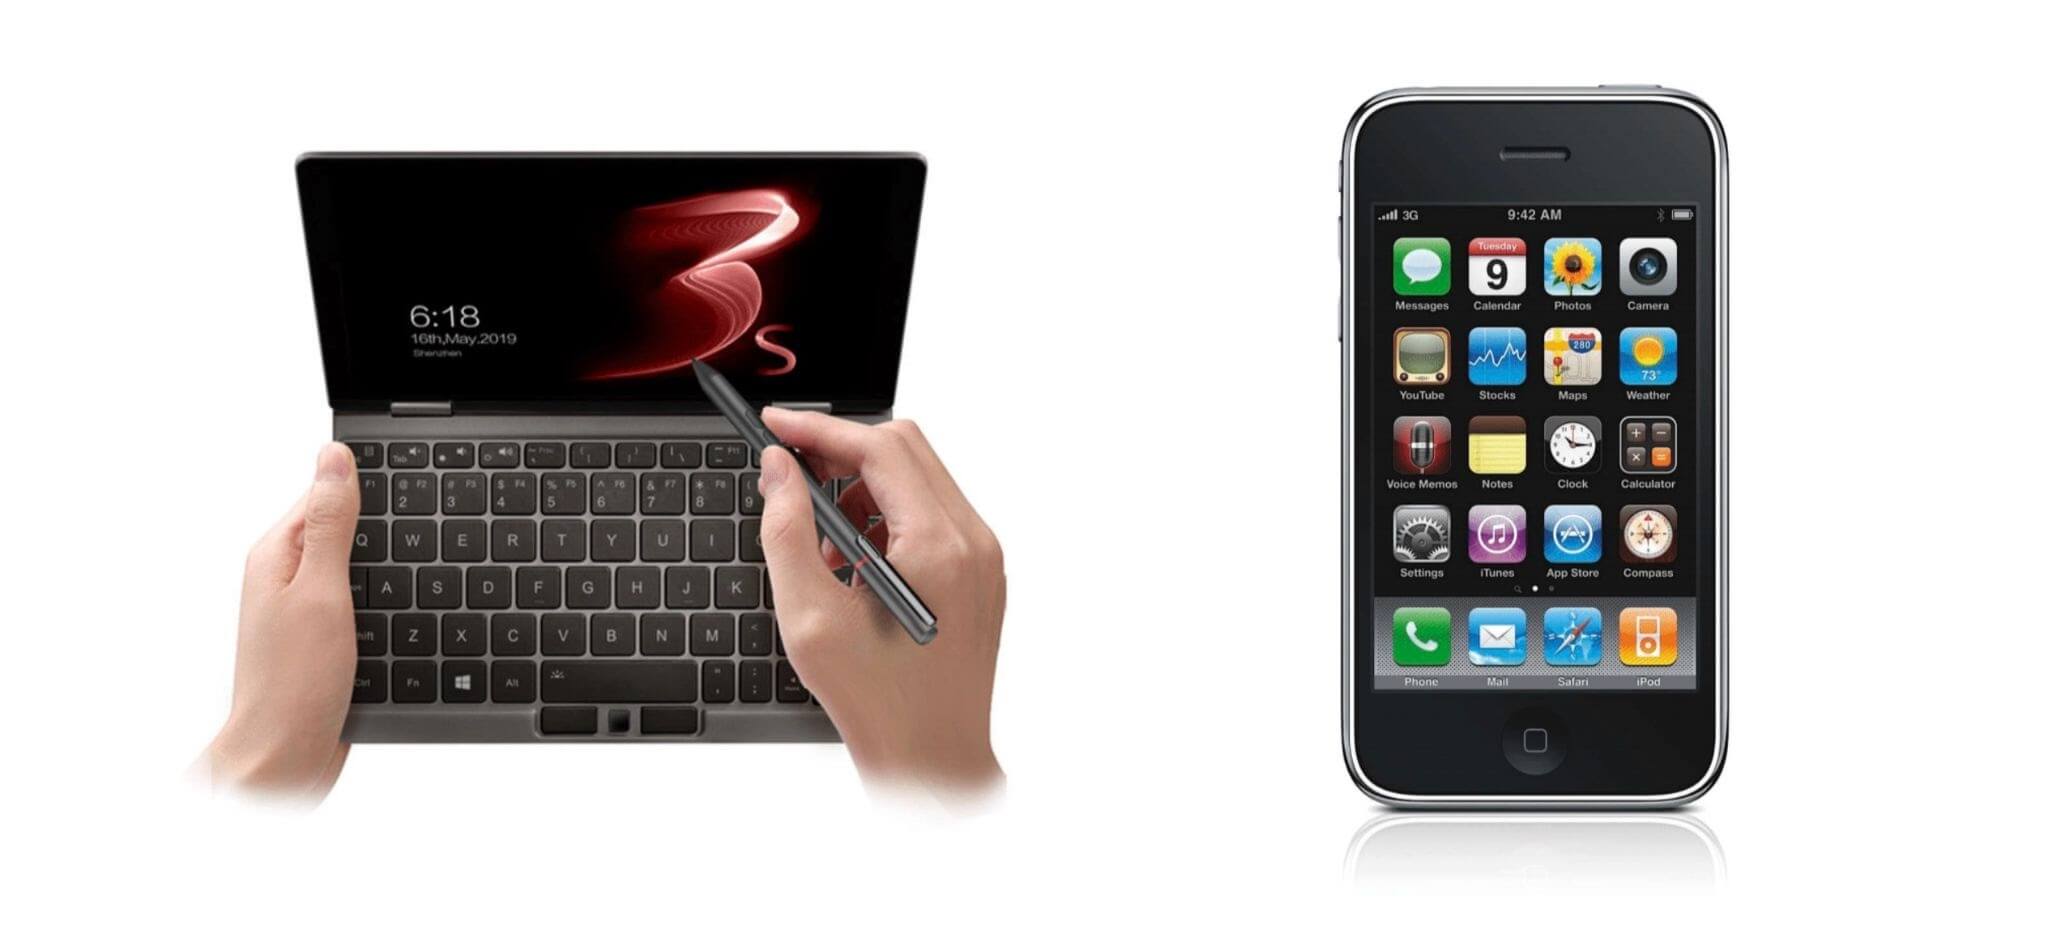 Laptop and smartphone